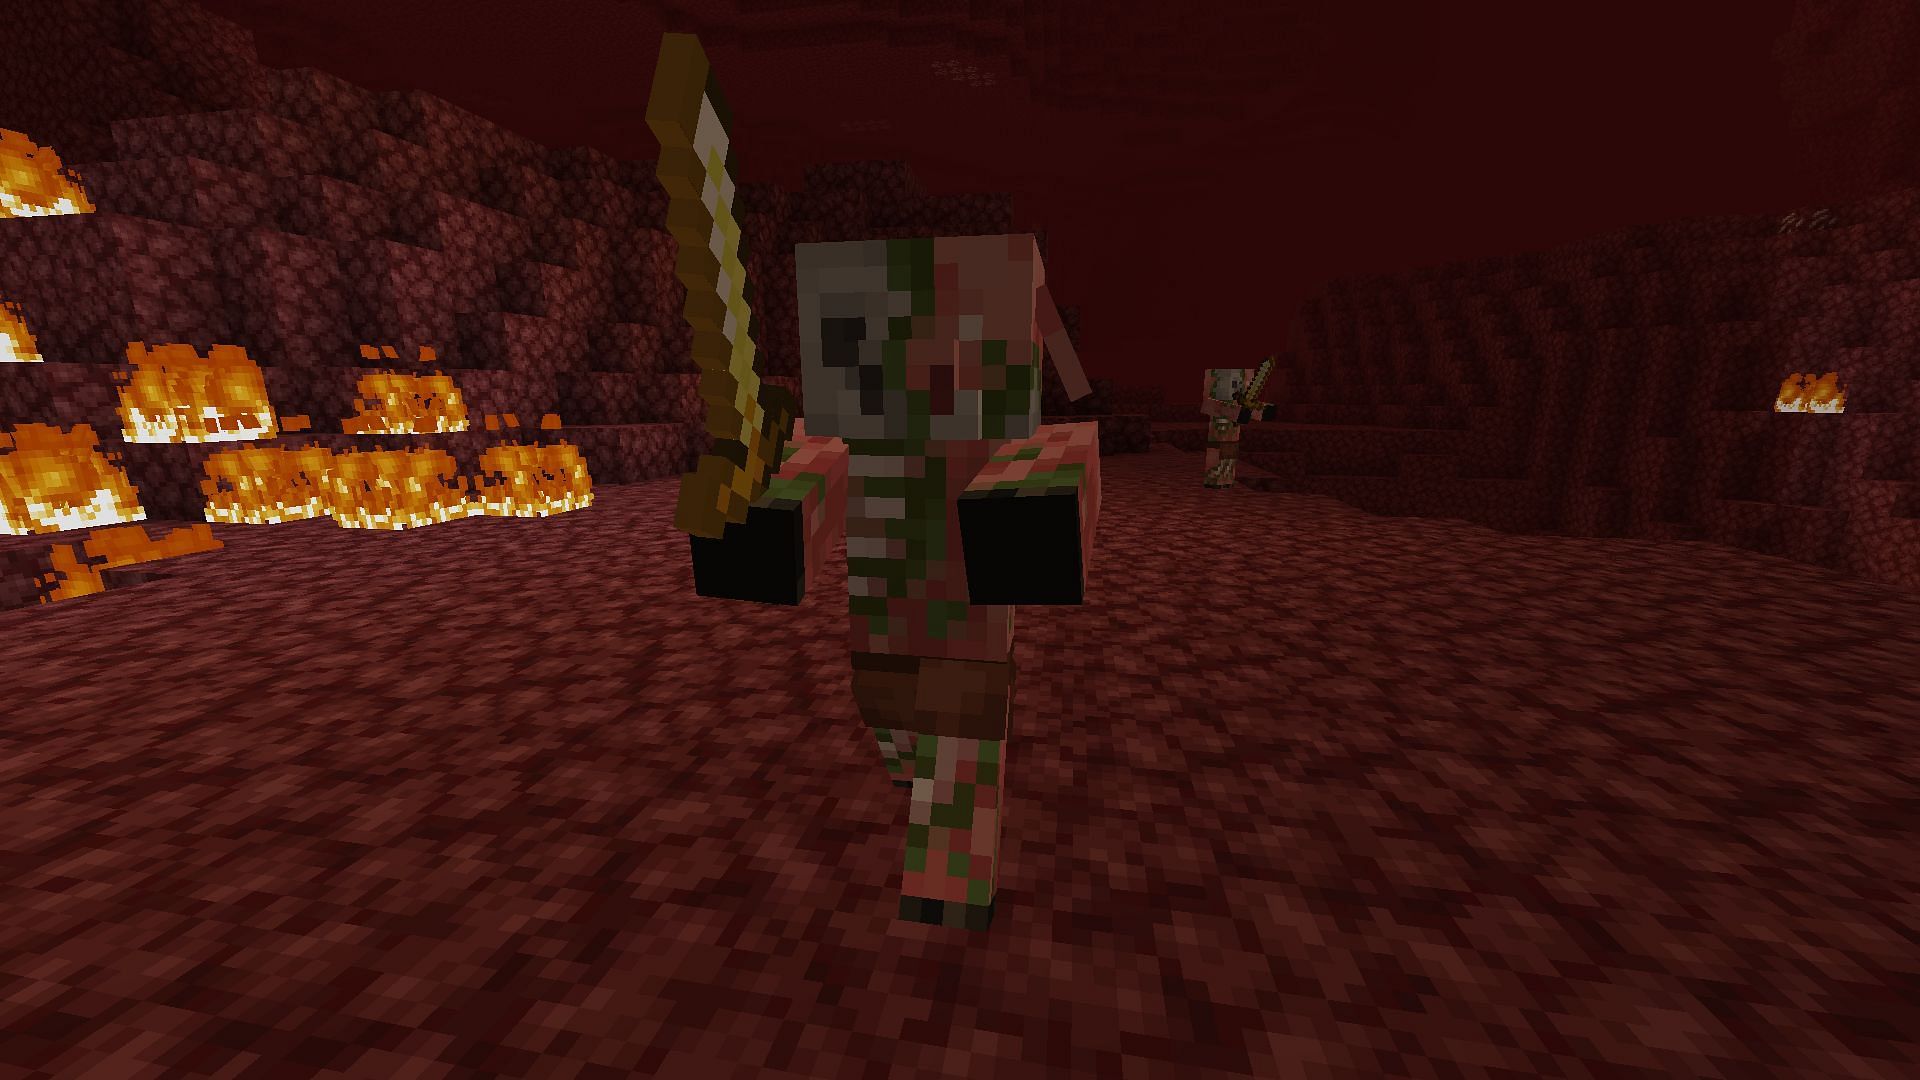 If they are accidentally attacked, all hell will break loose on Minecraft players (Image via Mojang)